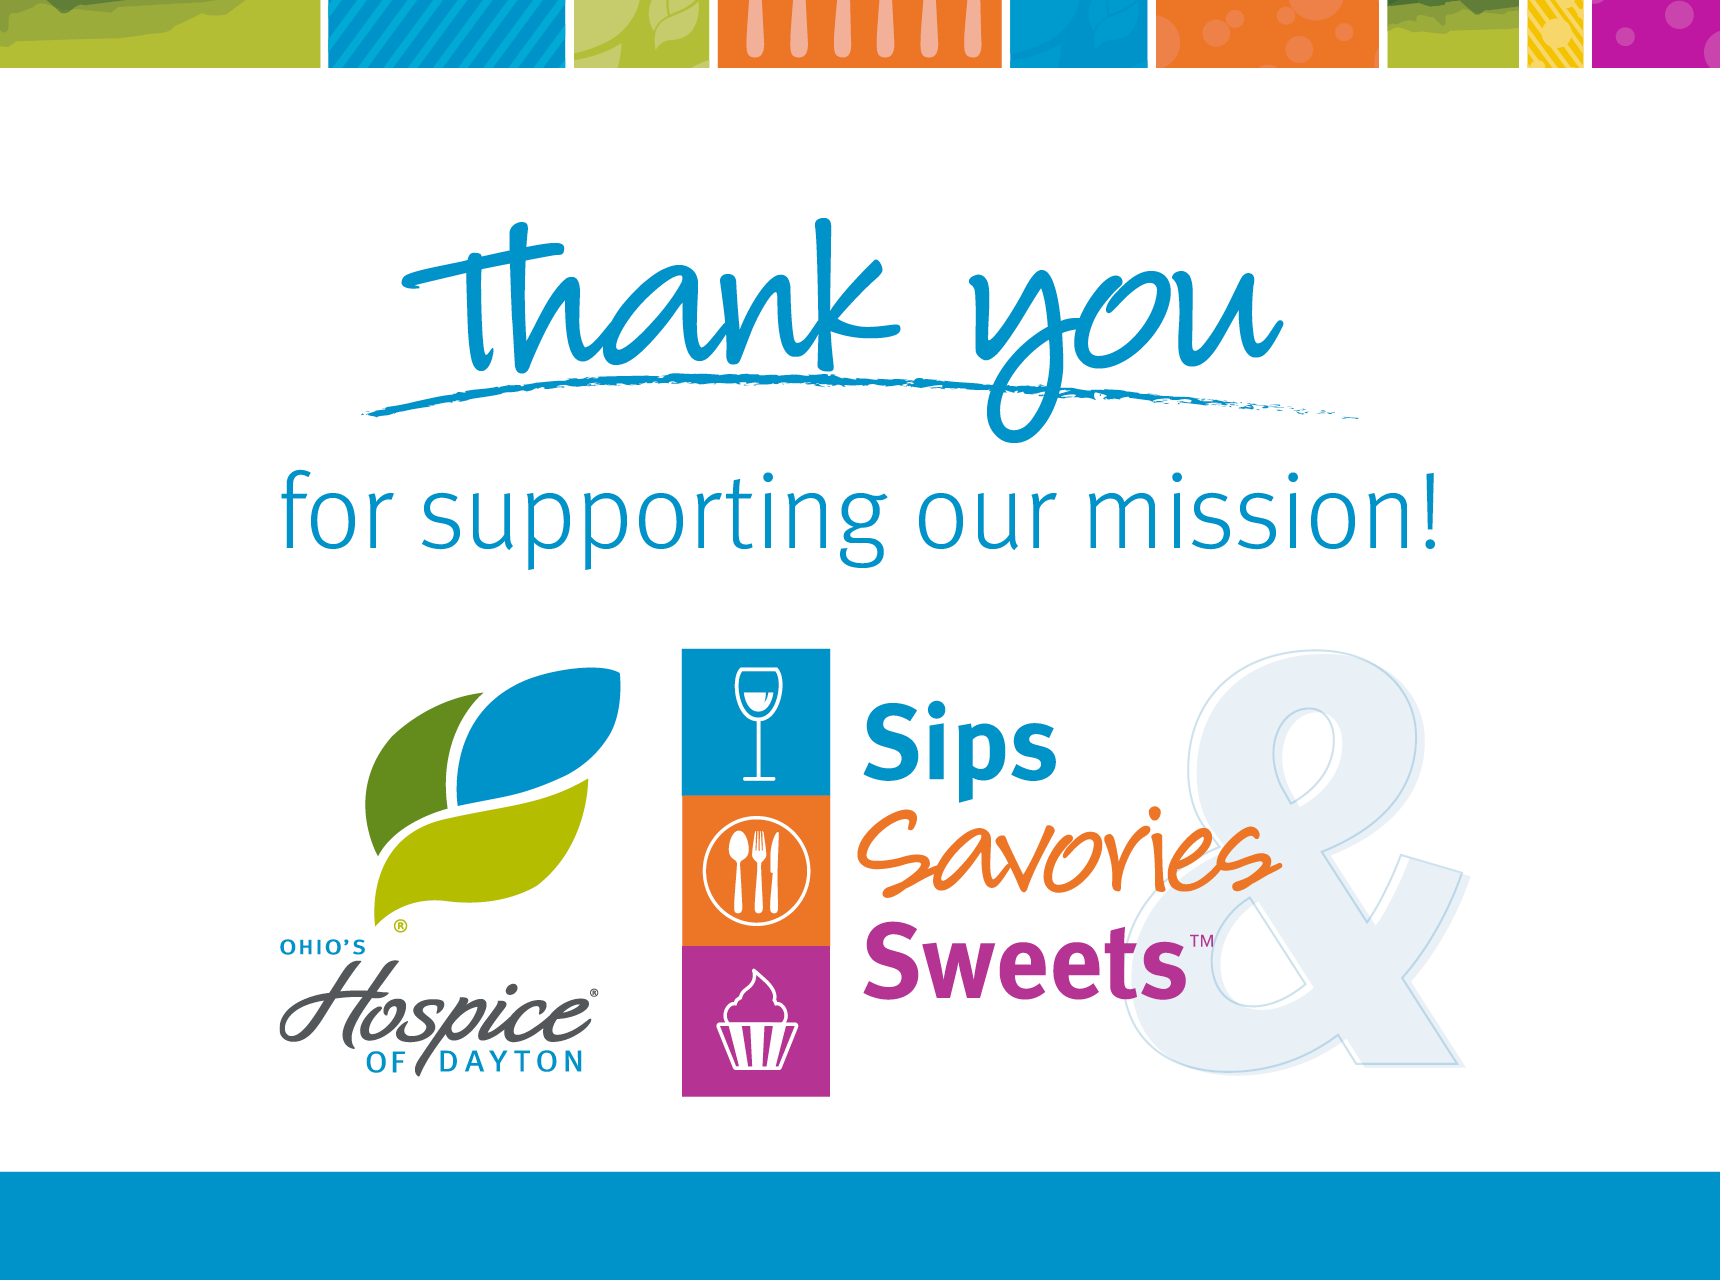 Thank you for supporting our mission! Sips, Savories & Sweets!